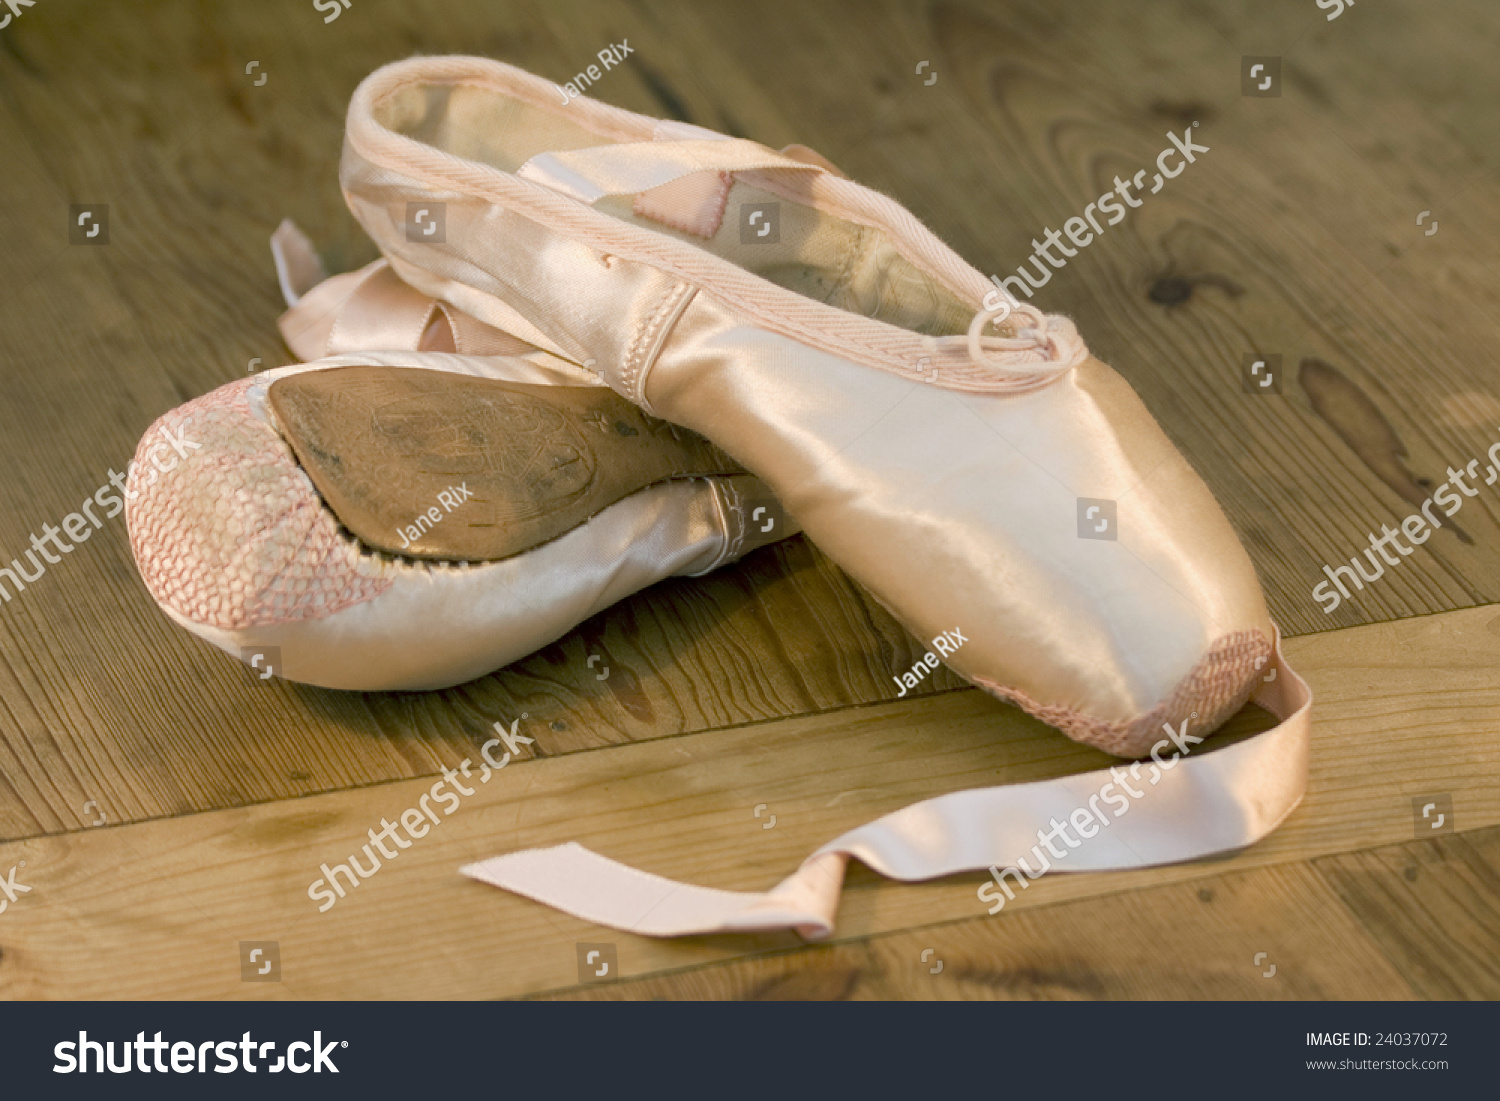 Pair Discarded Ballet Shoes On Wooden Stock Photo 24037072 - Shutterstock